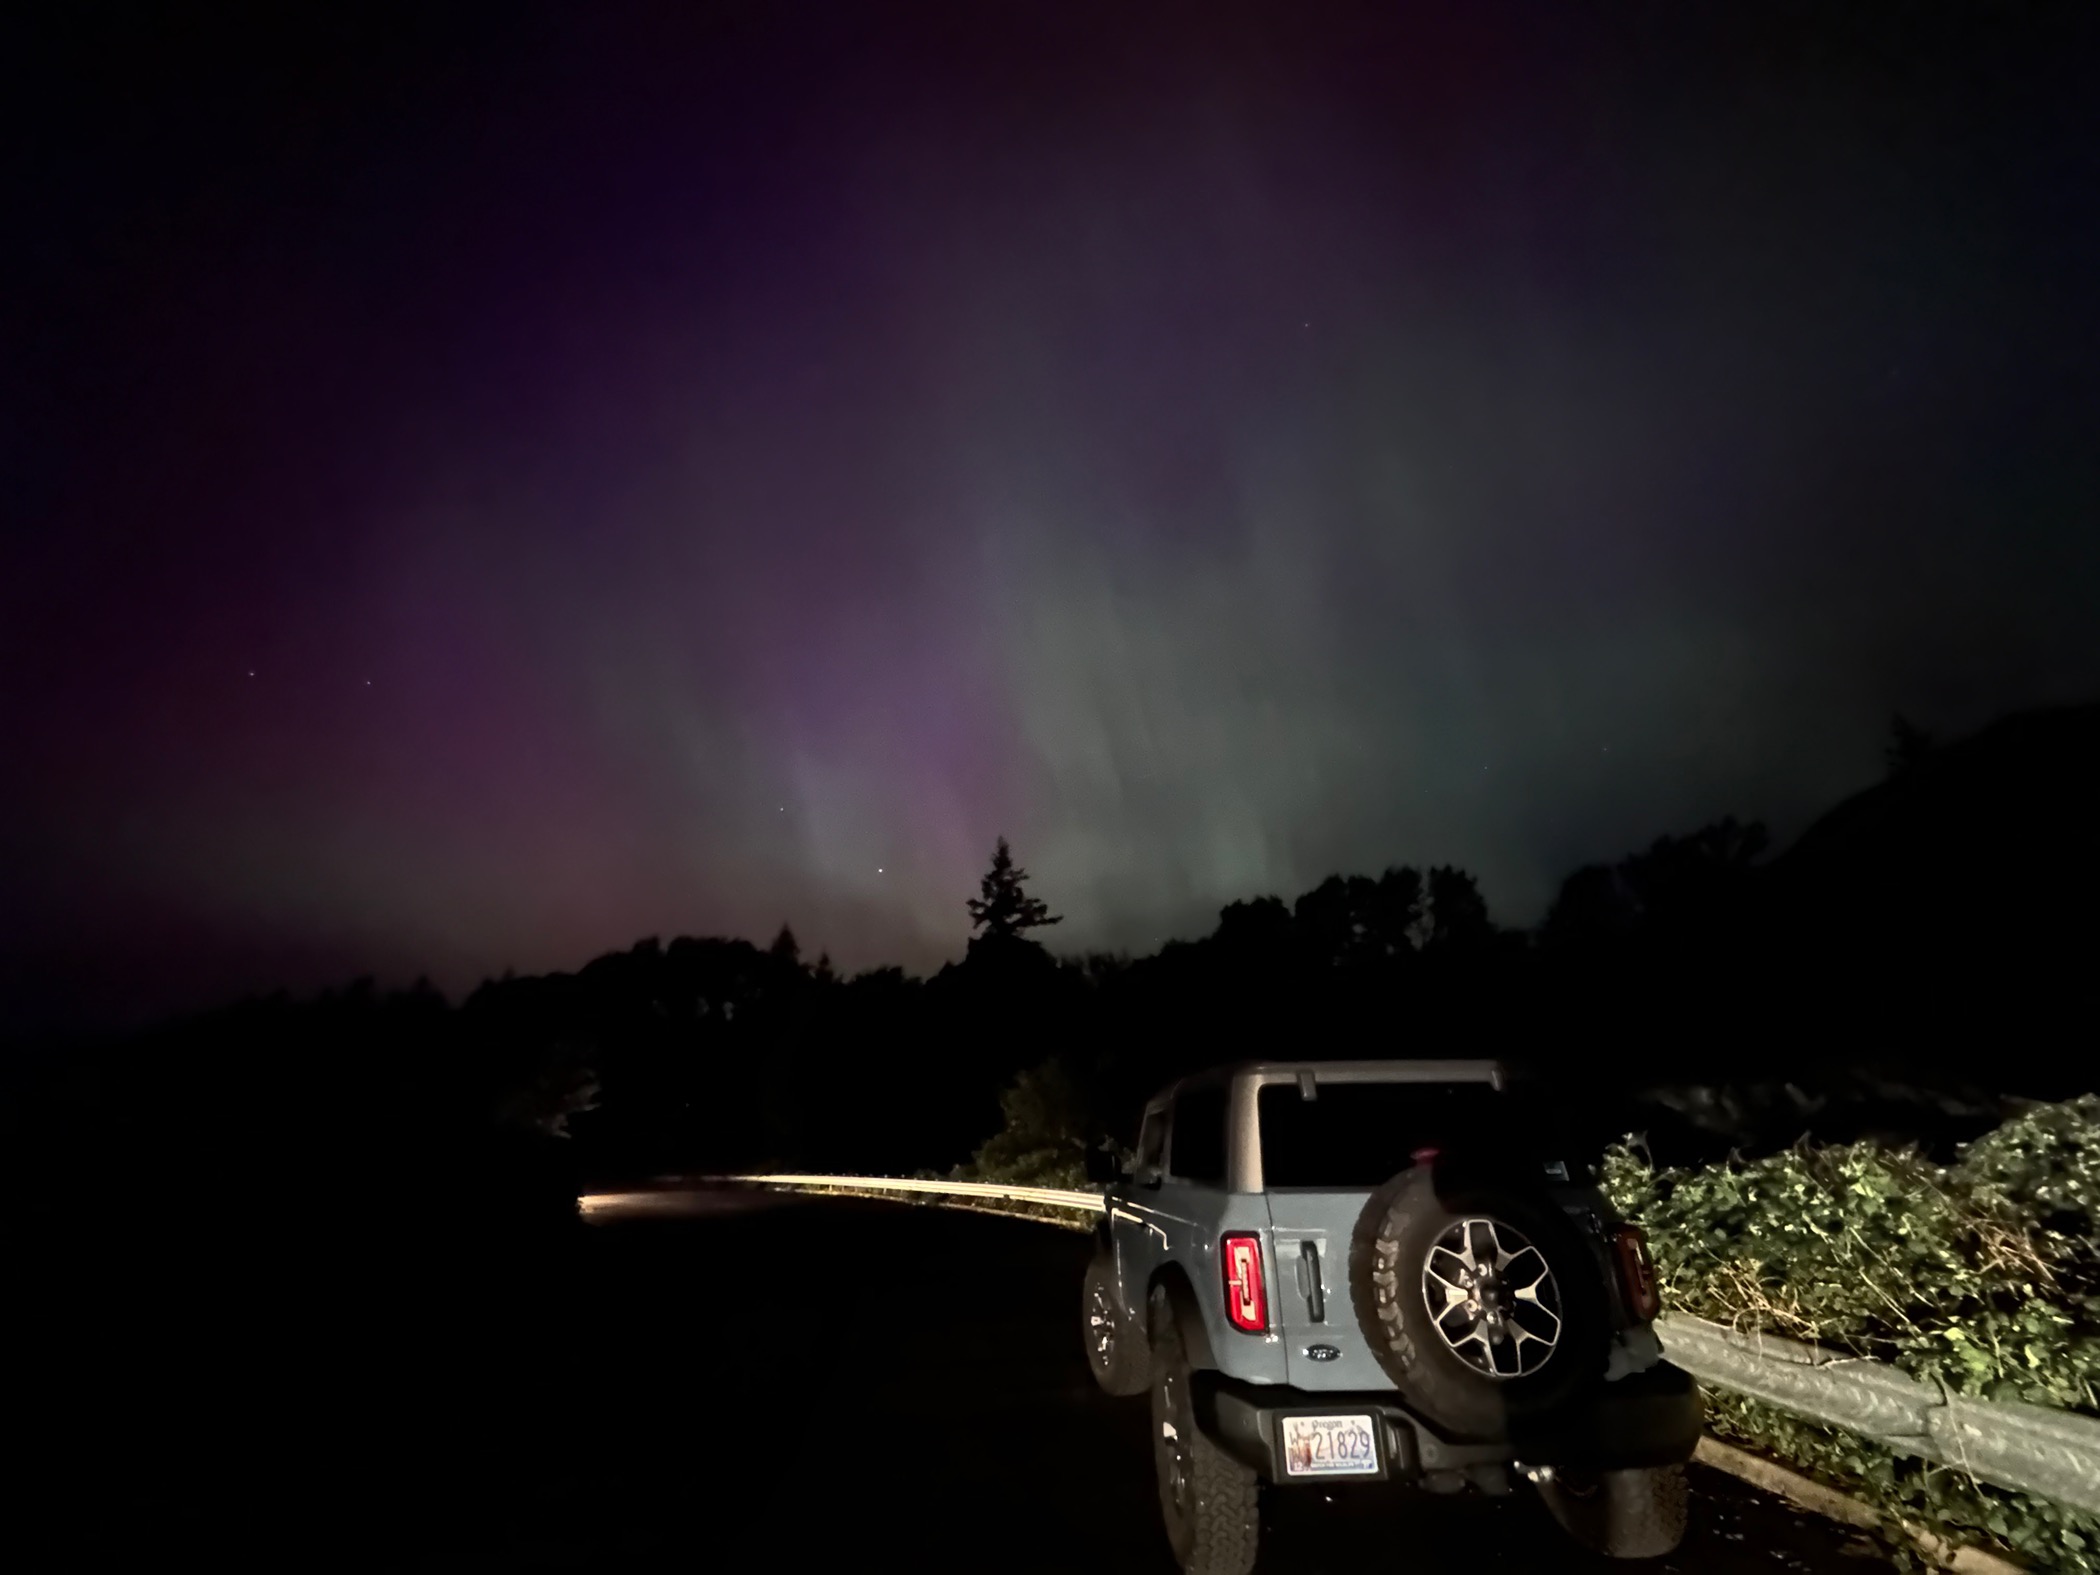 Ford Bronco This is what I've been waiting for! 🤯 Northern Lights + My Wrapped Bronco IMG_3188